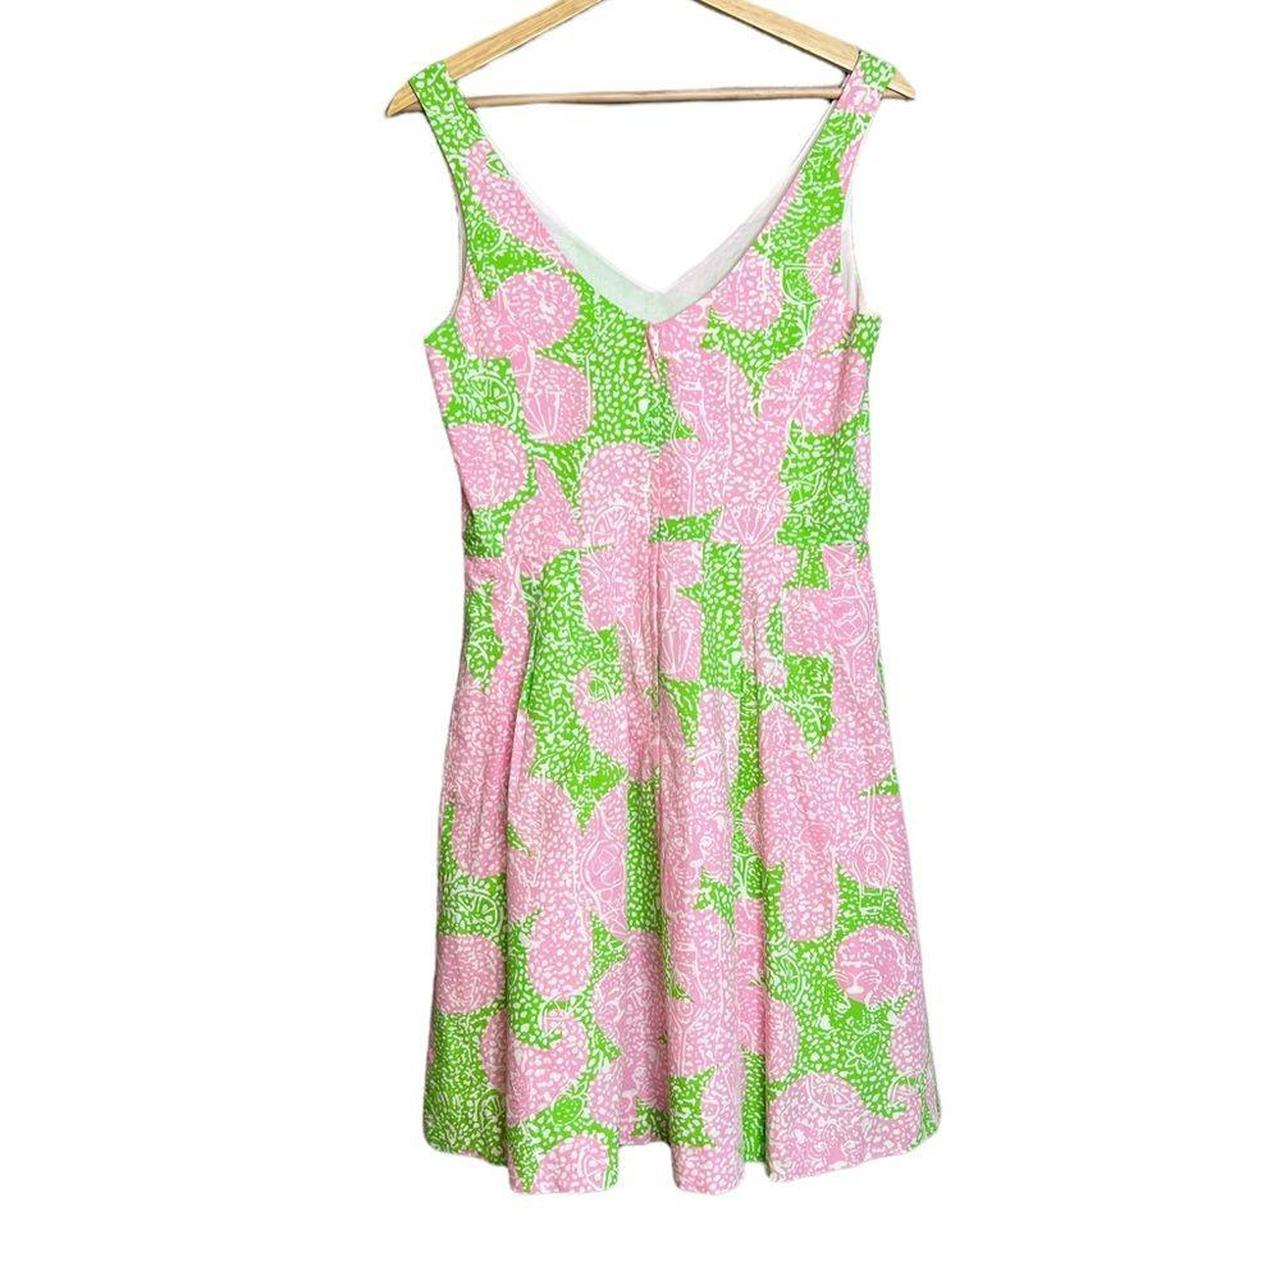 Lilly Pulitzer Women's Green and Pink Dress (2)